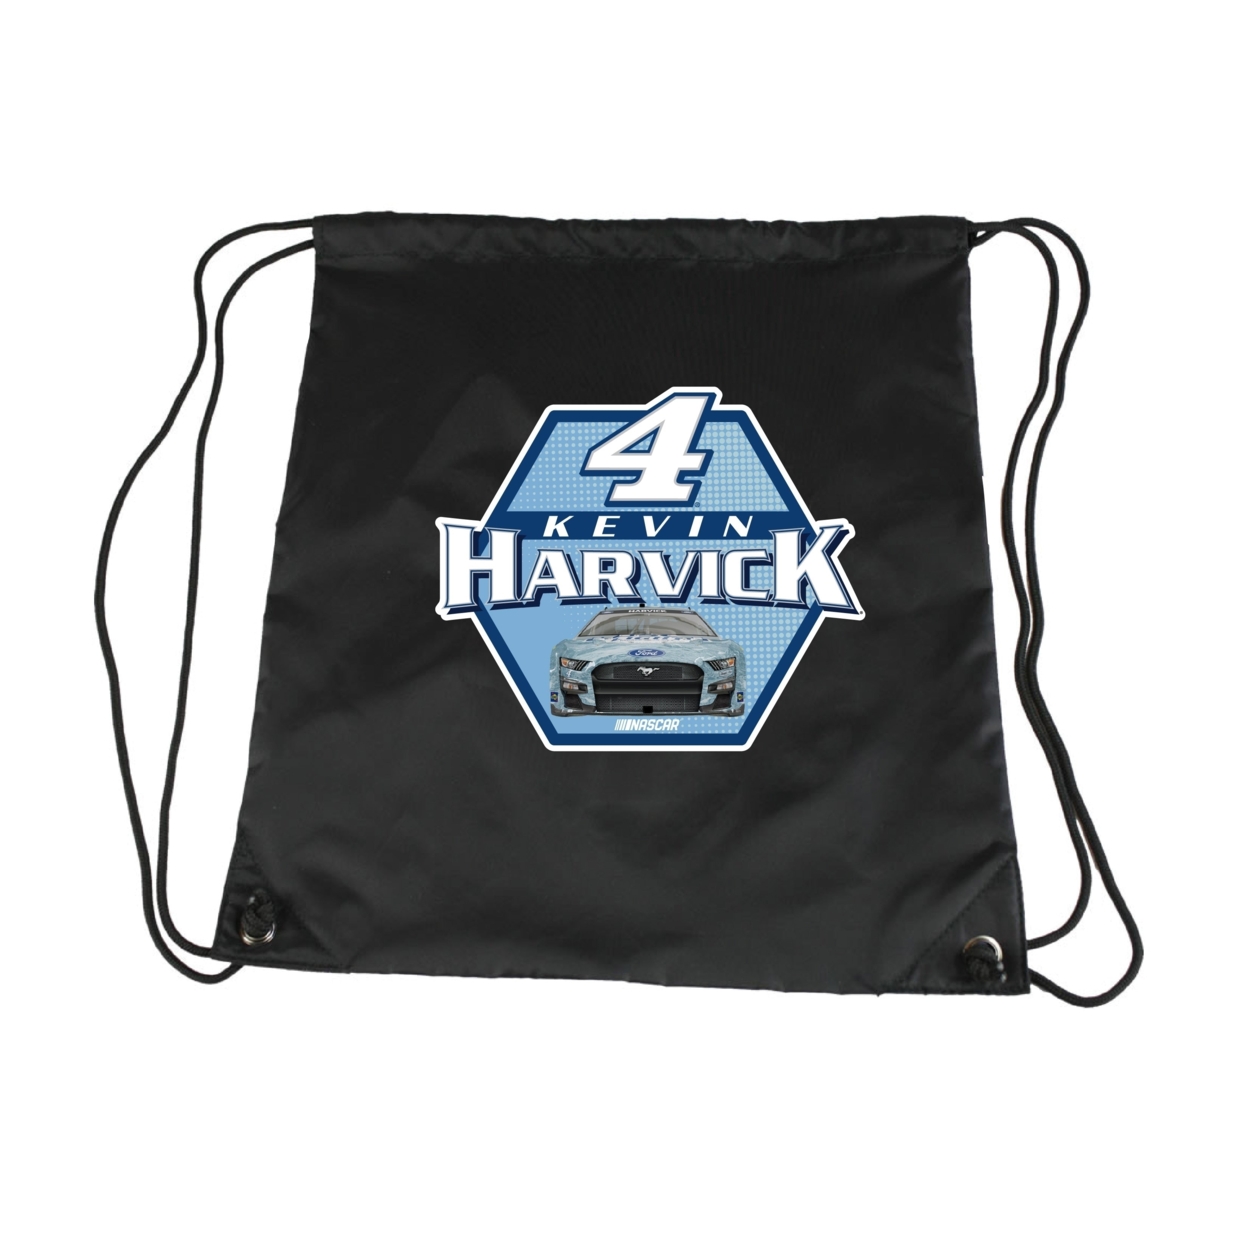 #4 Kevin Harvick Officially Licensed Nascar Cinch Bag With Drawstring